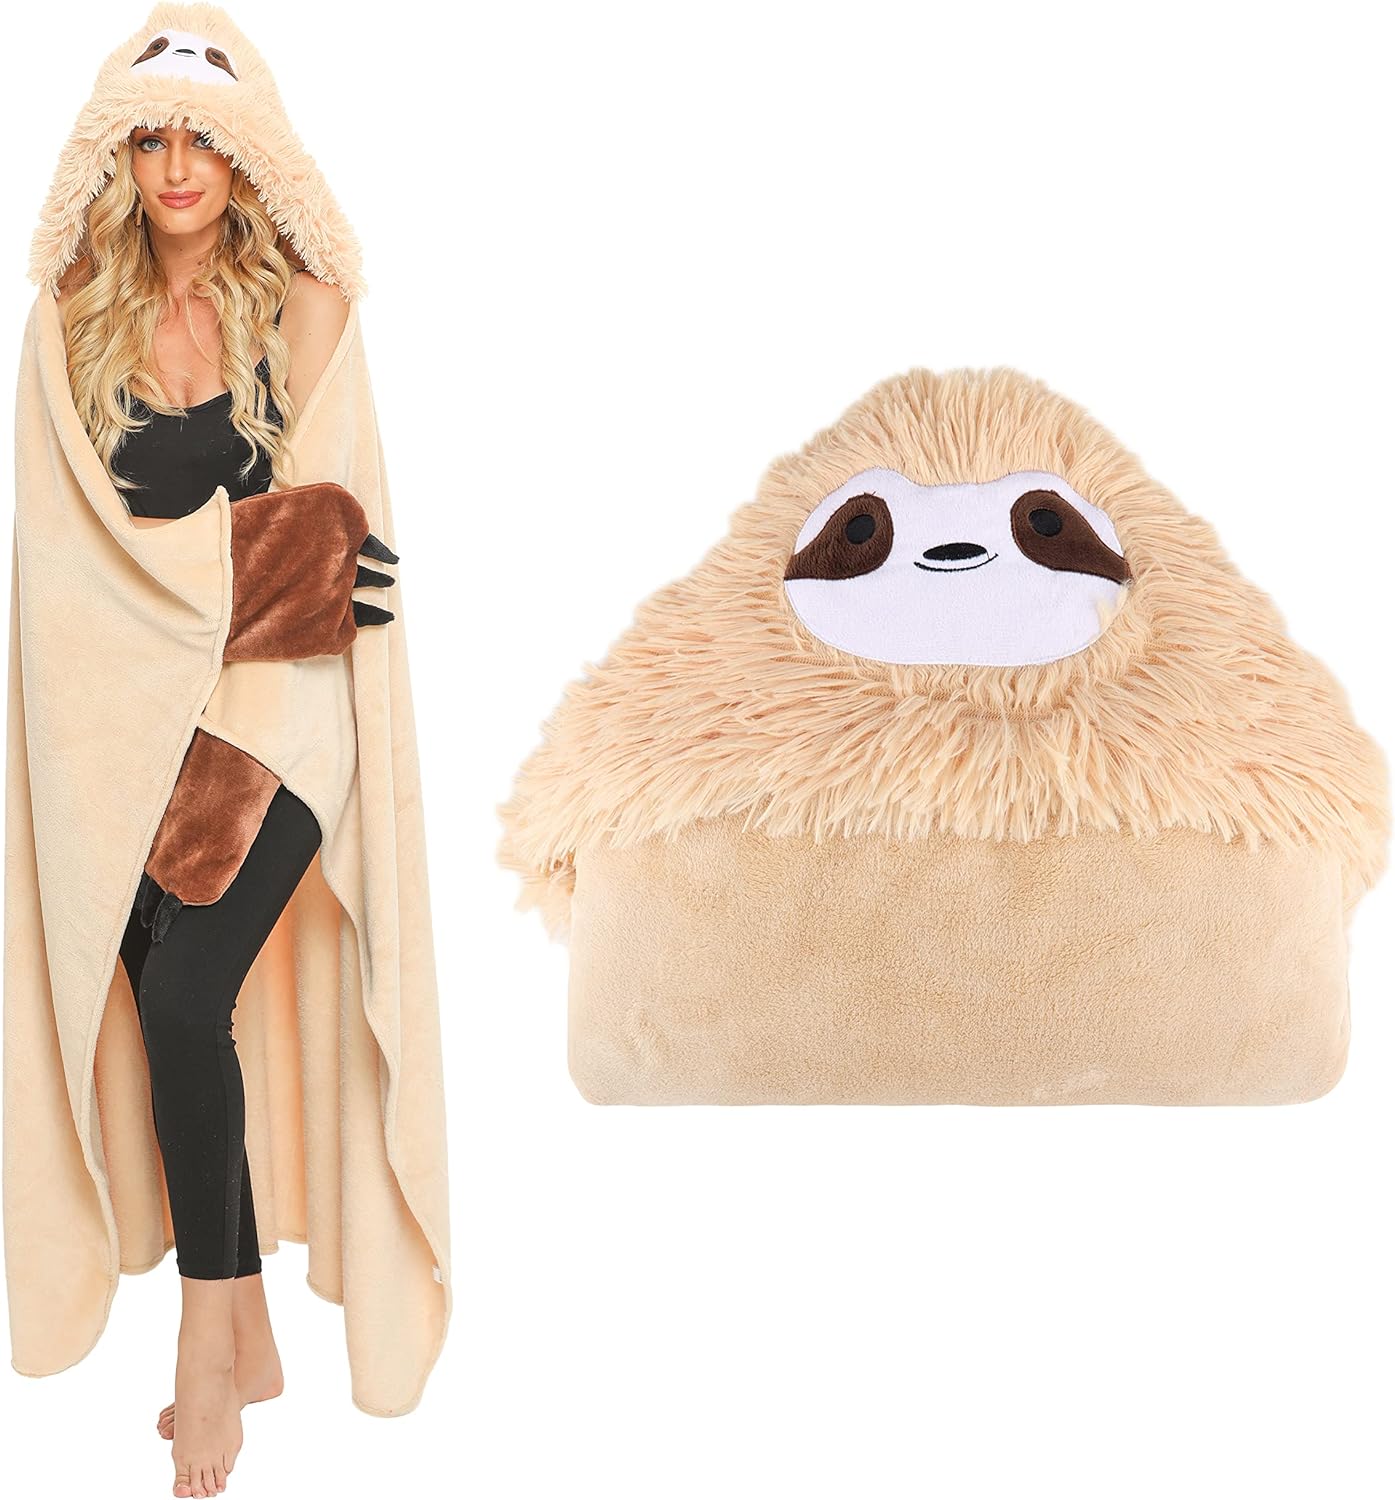 Moyel Sloth Blanket Fuzzy Soft Warm Wearable Hooded Blanket Birthday Gifts for Women Christmas Valentines Day Mothers Day Mom Gifts Sloth Gifts for Mom Friend Wife Sister Granddaughter Girlfriend